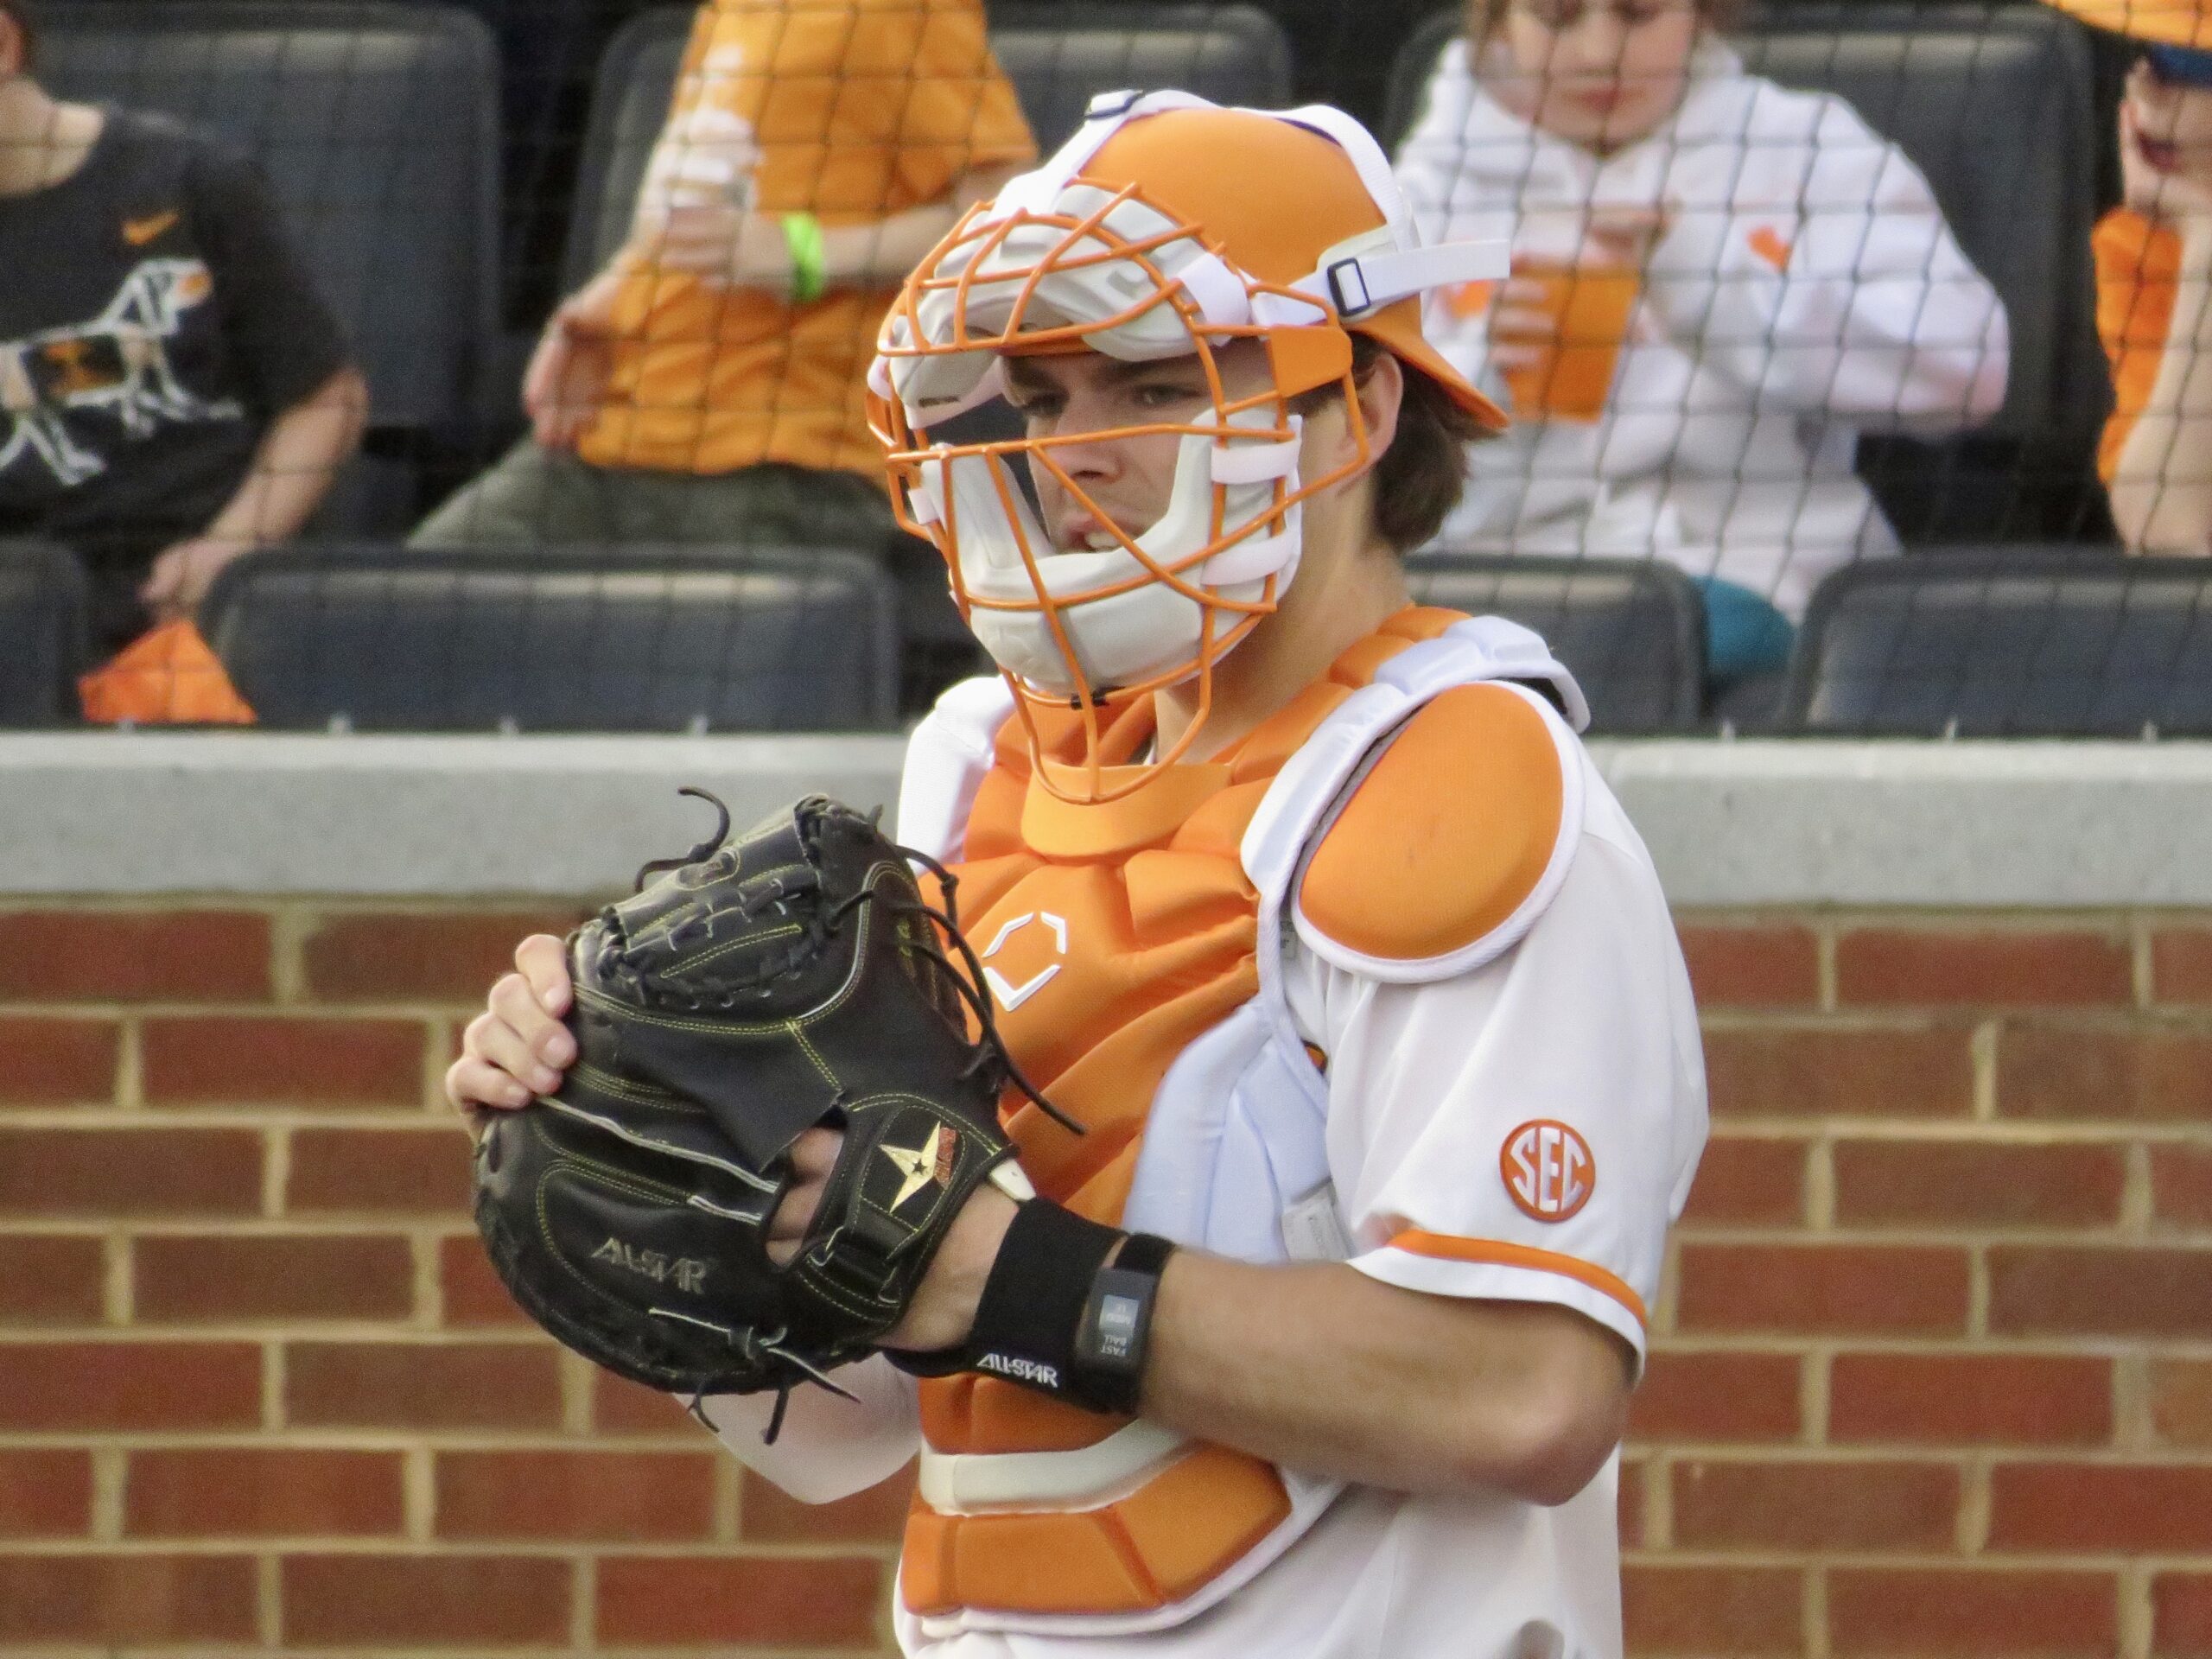 LIVE Updates, Score, Notes: Charleston Southern @ No. 3 Tennessee